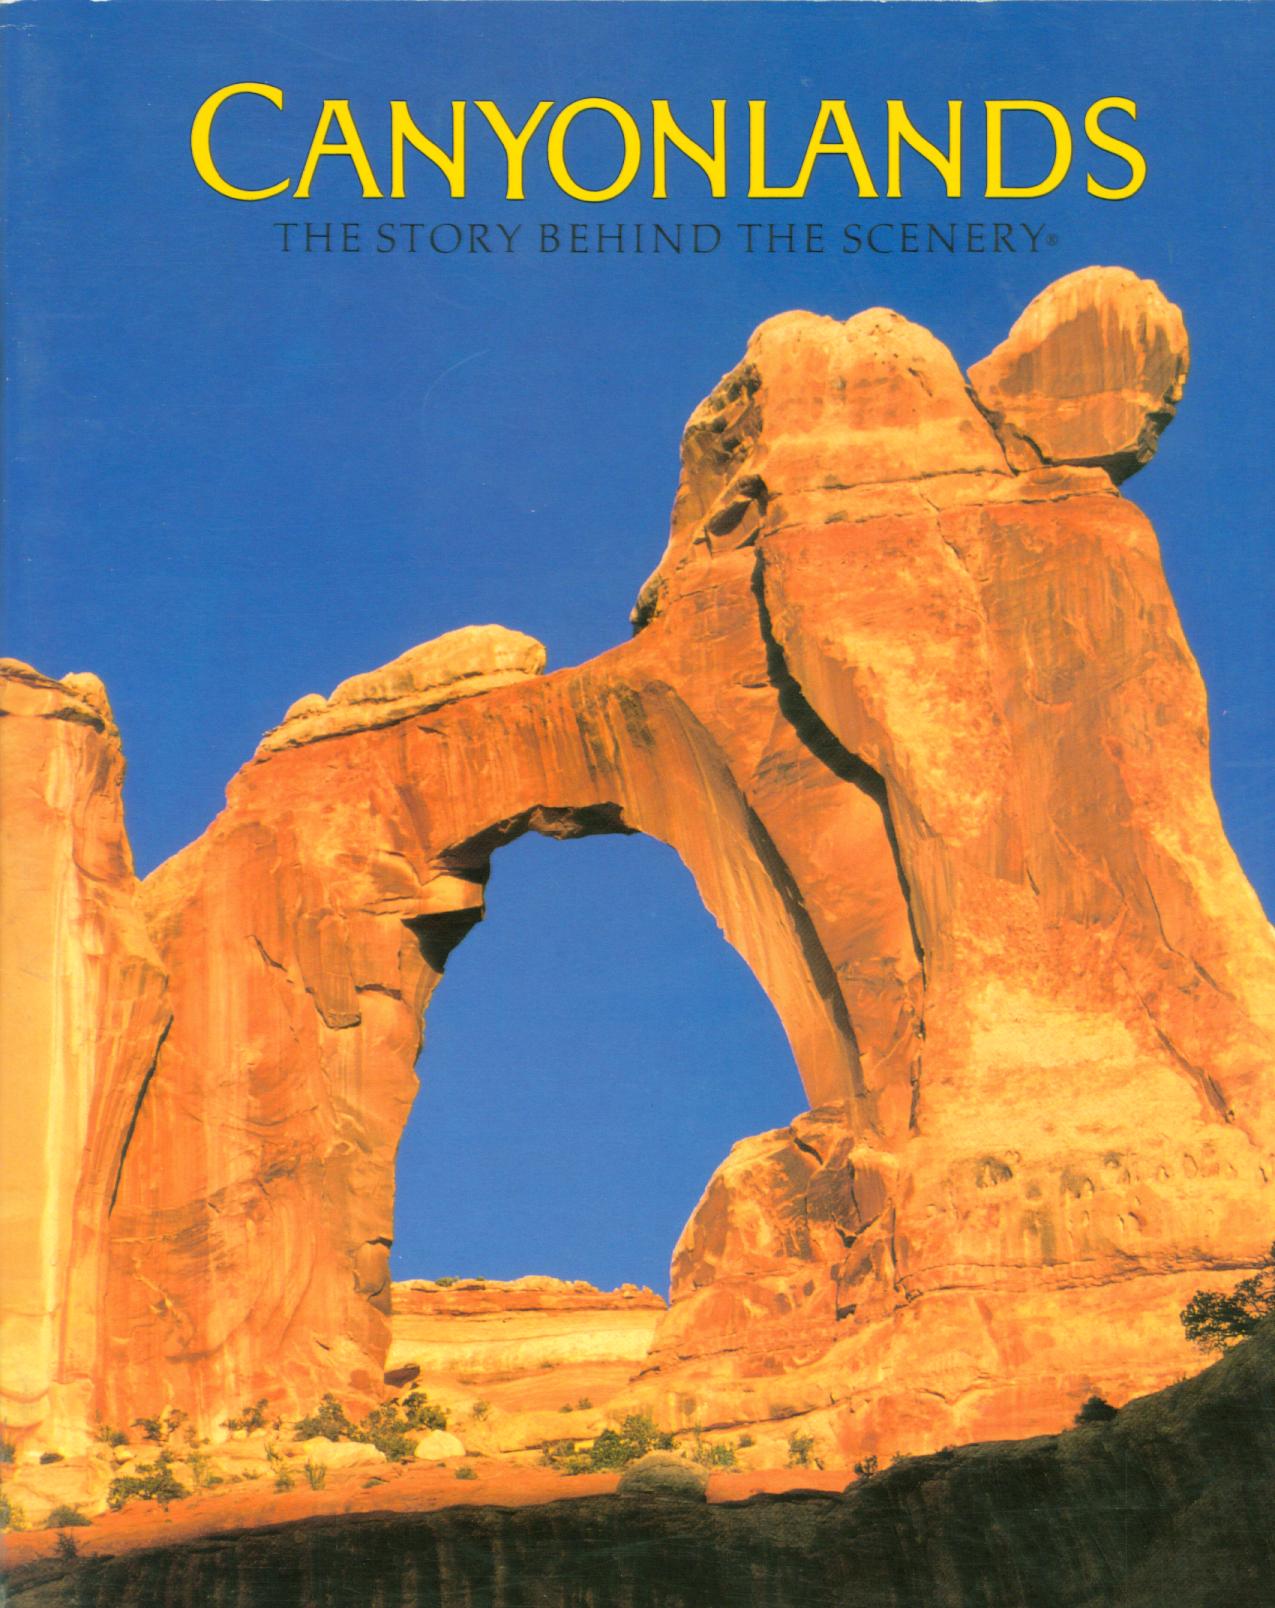 CANYONLANDS: the story behind the scenery (UT). by David Johnson. First printing